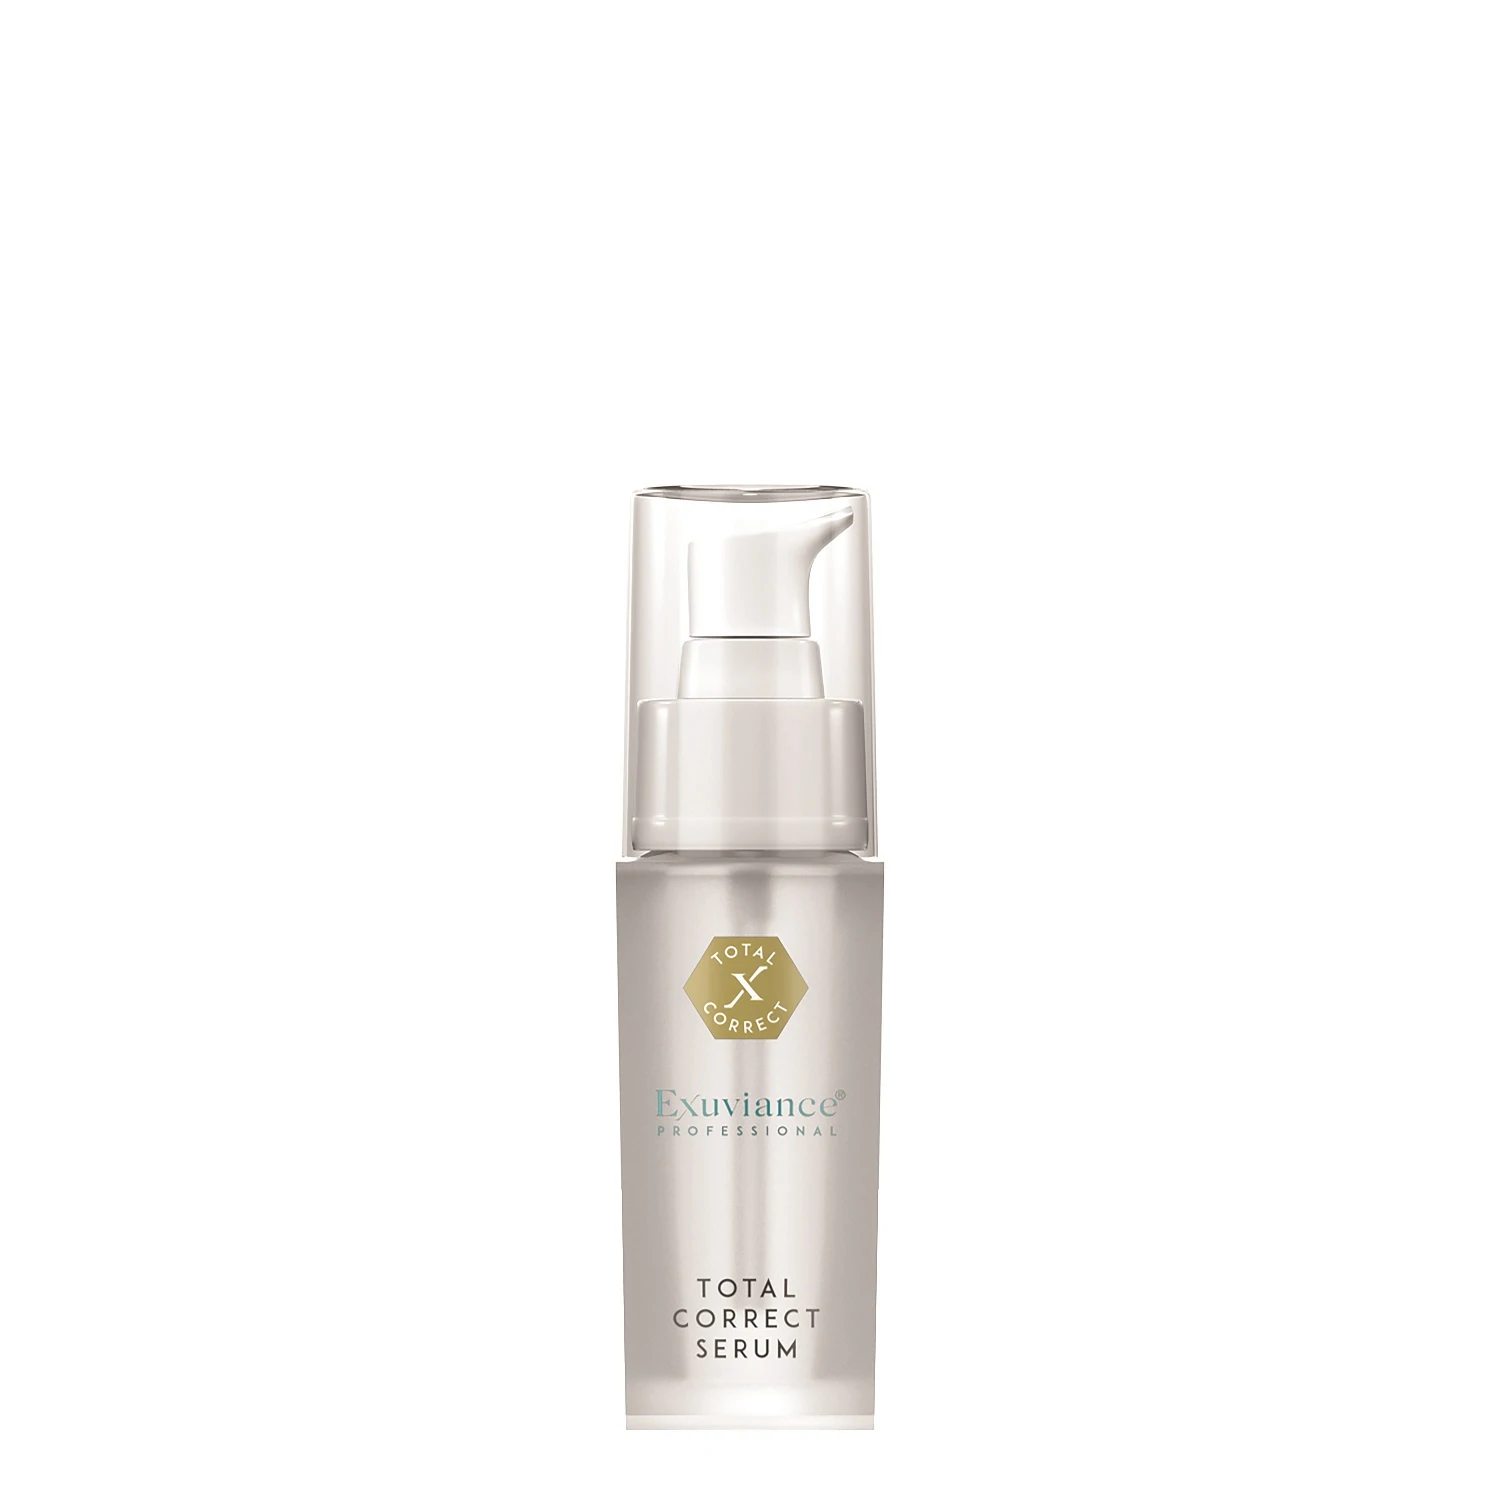 Exuviance Professional Total Correct Serum